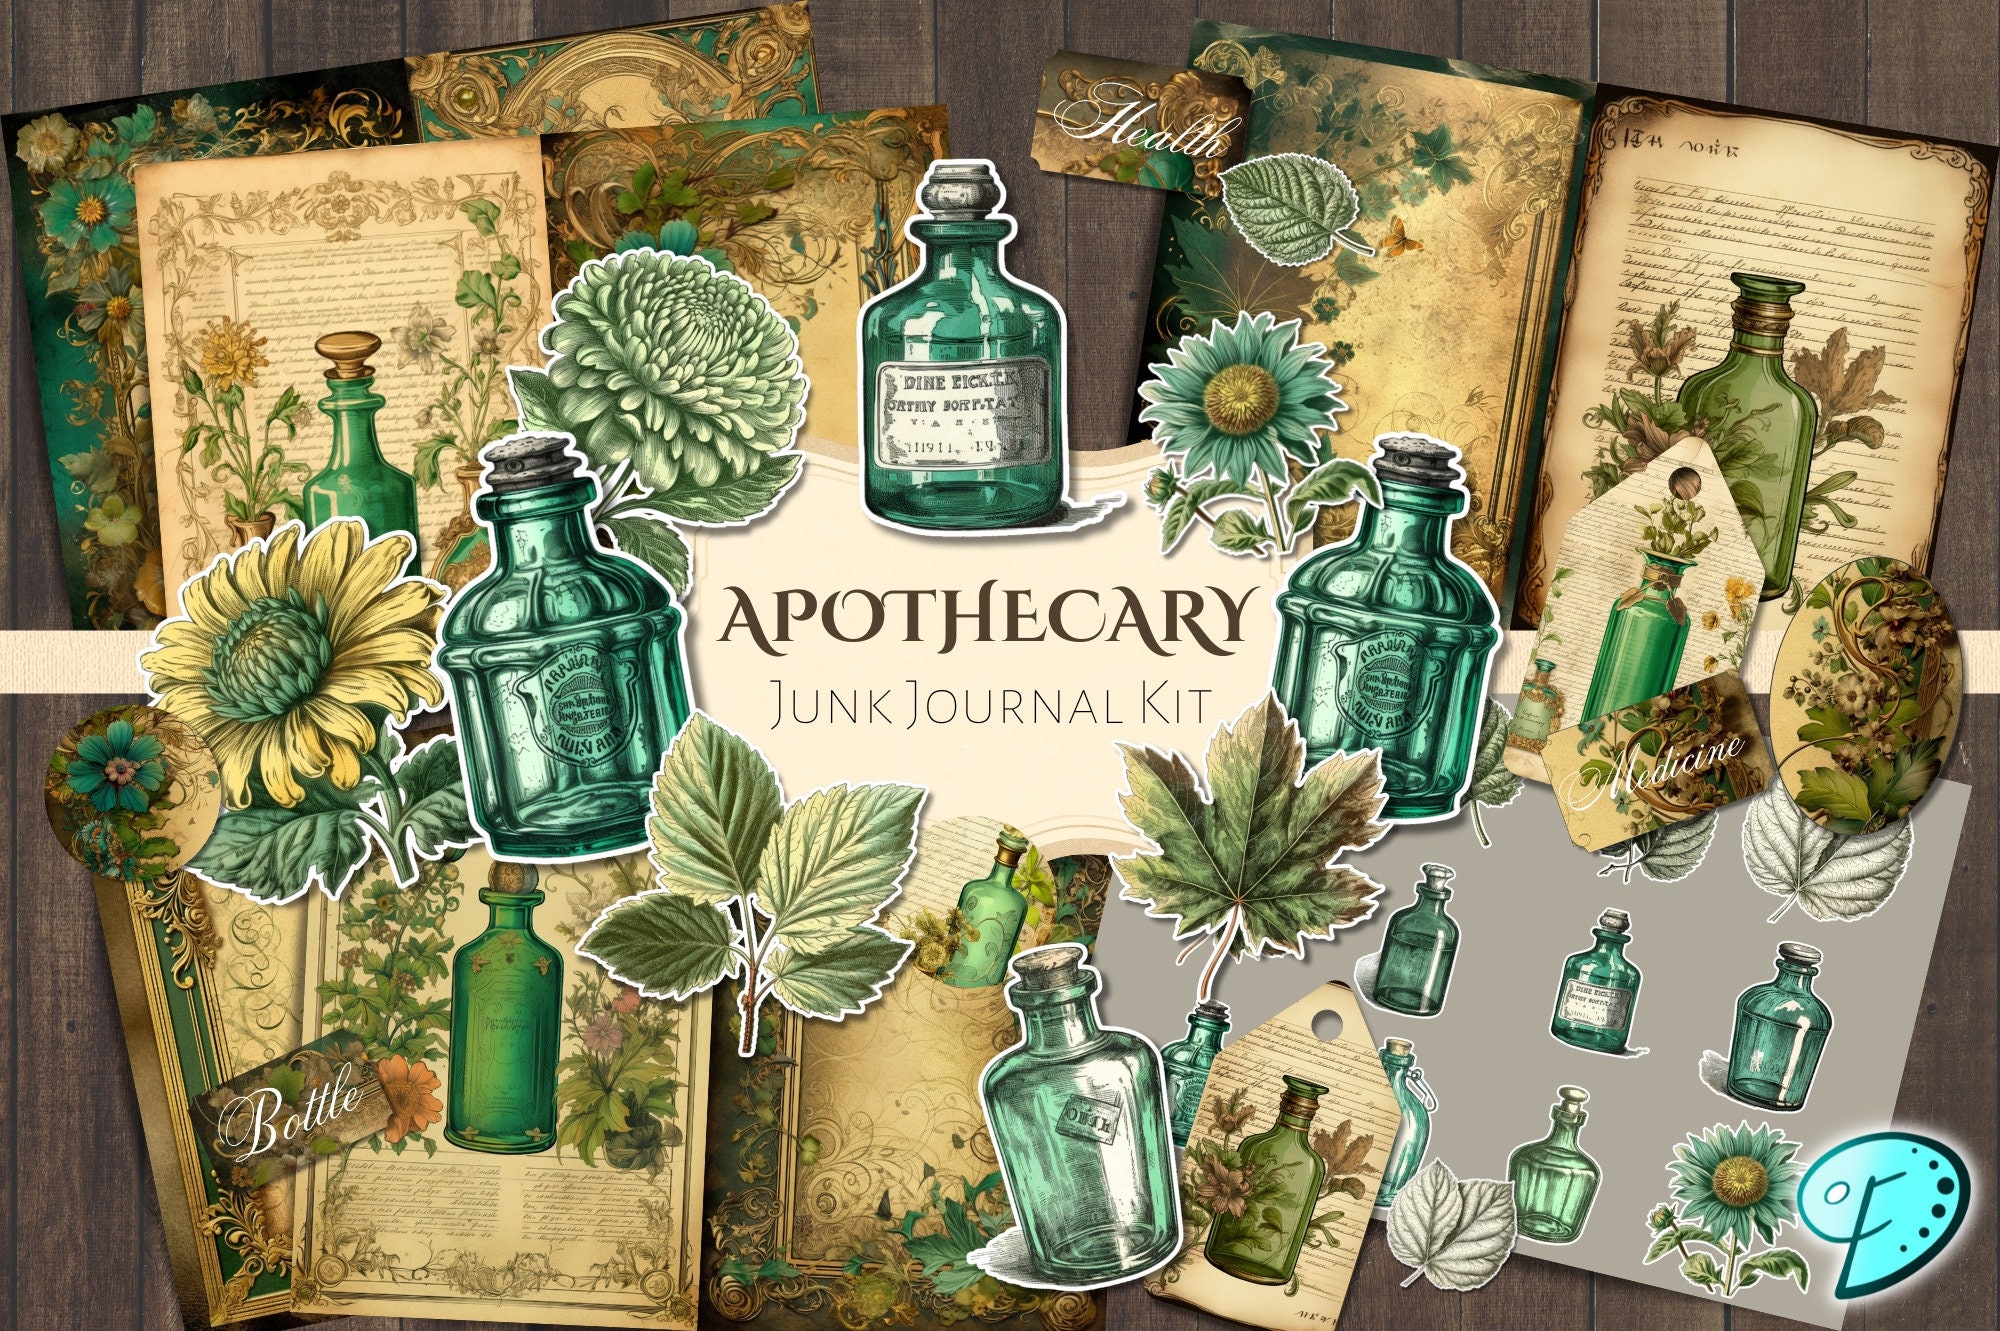 Junk Journal Kit, Apothecary, Nature, Herbal, Healing, Cottagecore,  Science, Steampunk, Shabby, My Porch Prints, Digital Download, Printable 